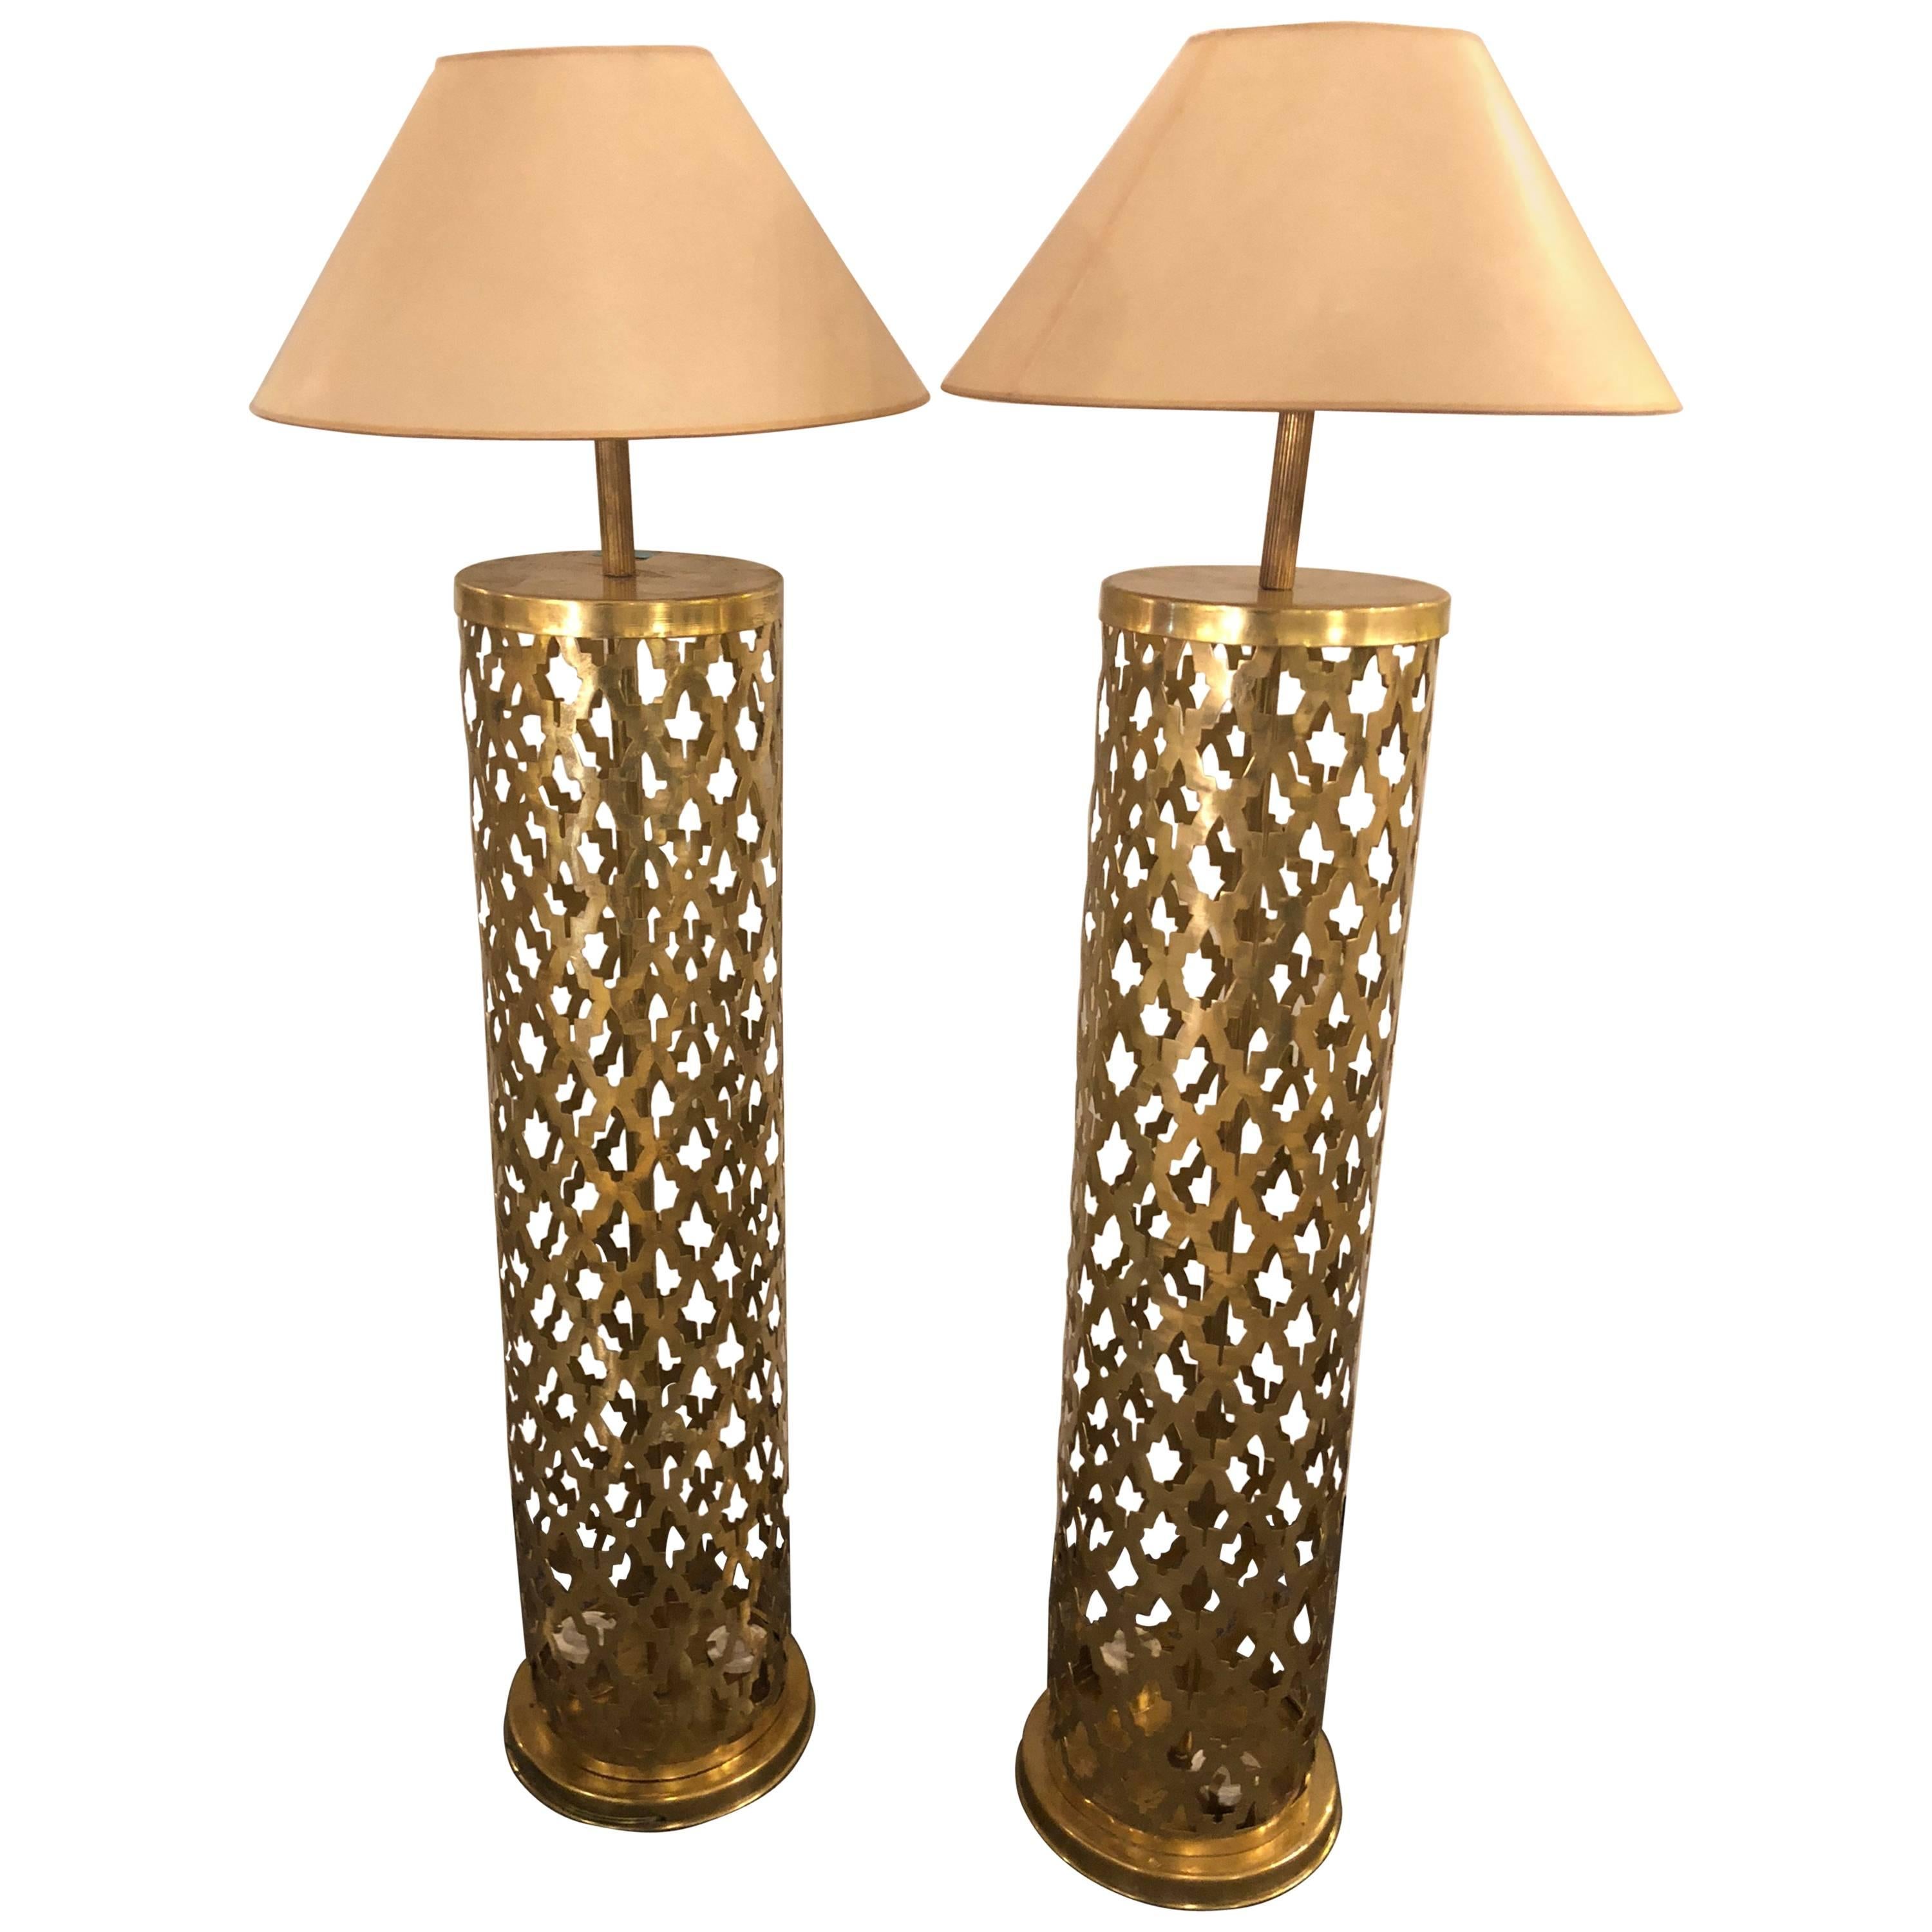 Pair of Hand-Hammered Pierced Brass Standing Lamps